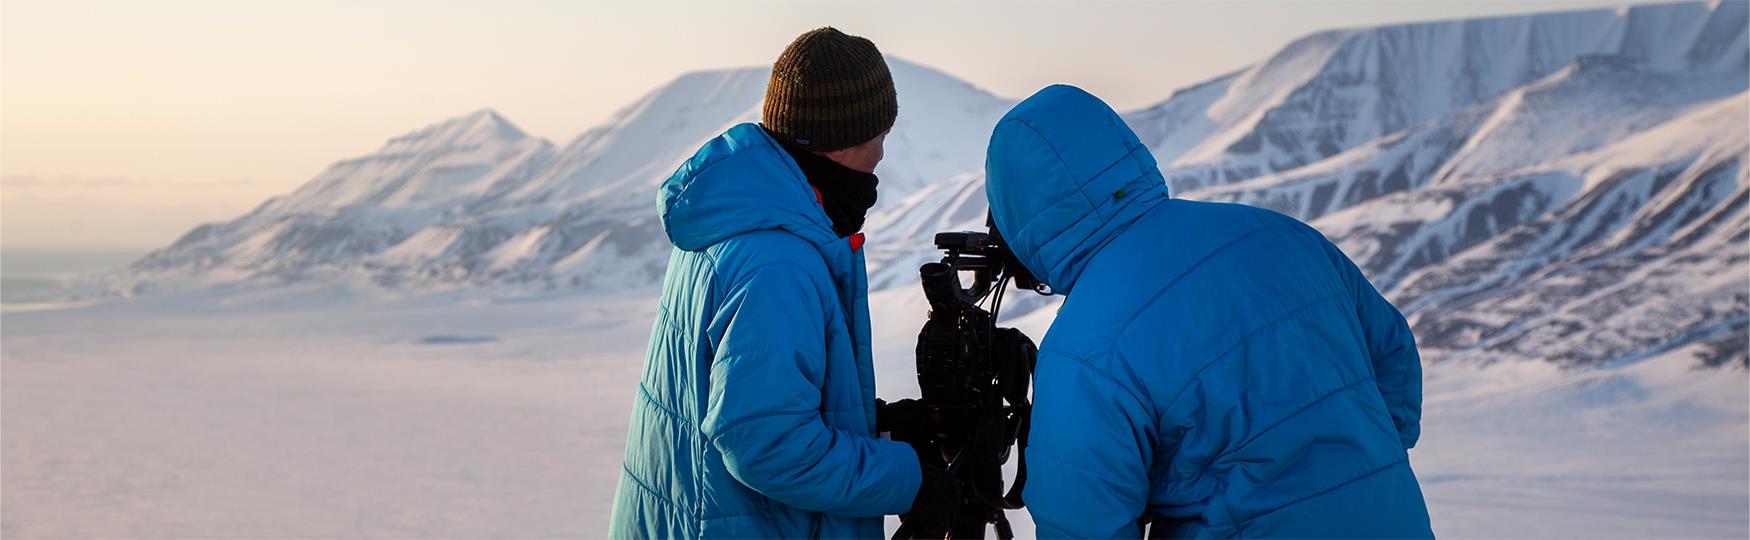 Two persons looking at a camera on a tripod with snow-covered mountains in the background